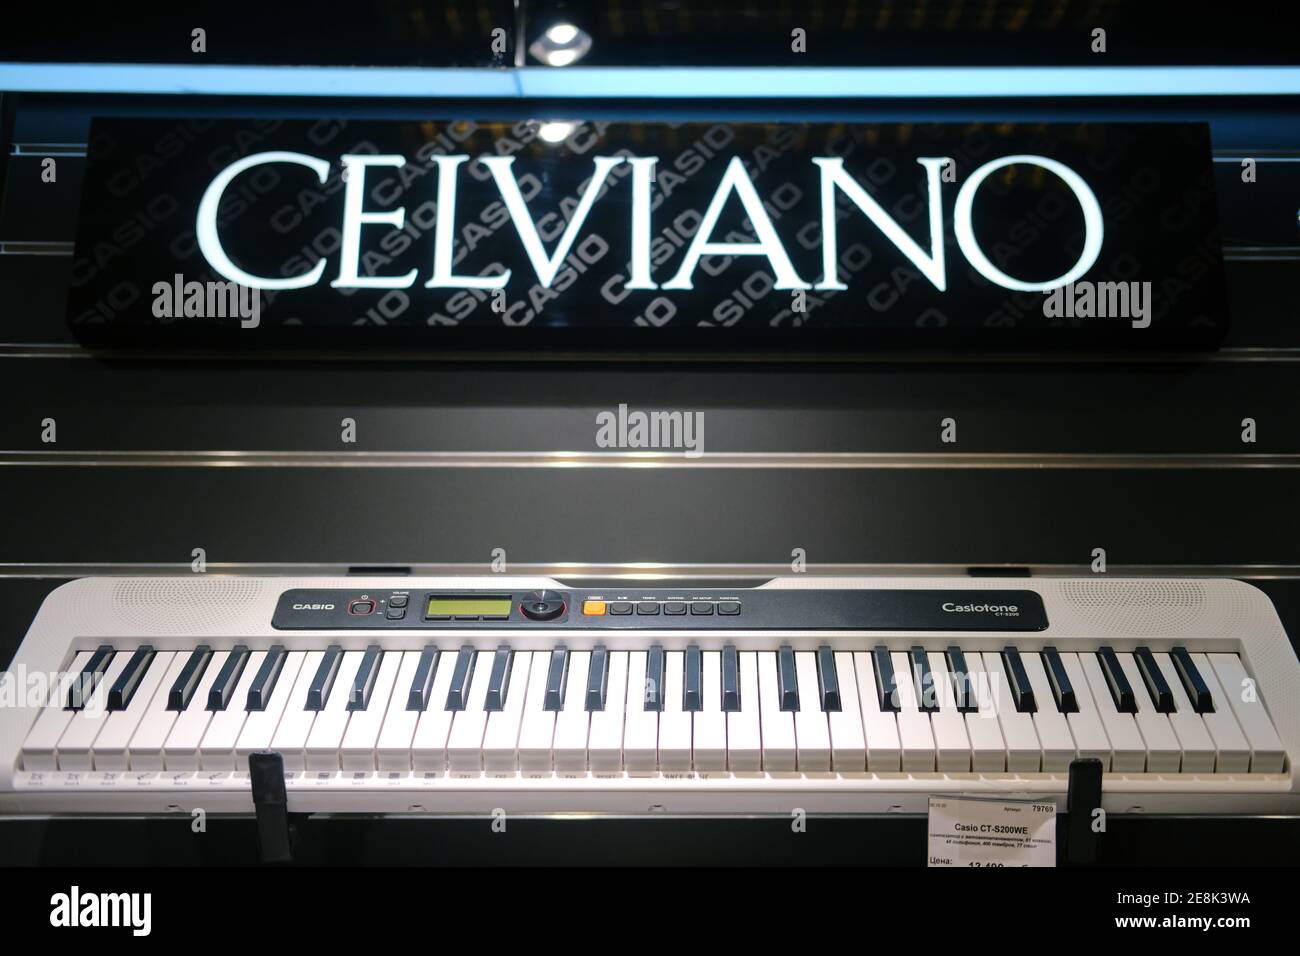 White synthesizers Casio, electronic piano Celviano in musical store. Stock Photo